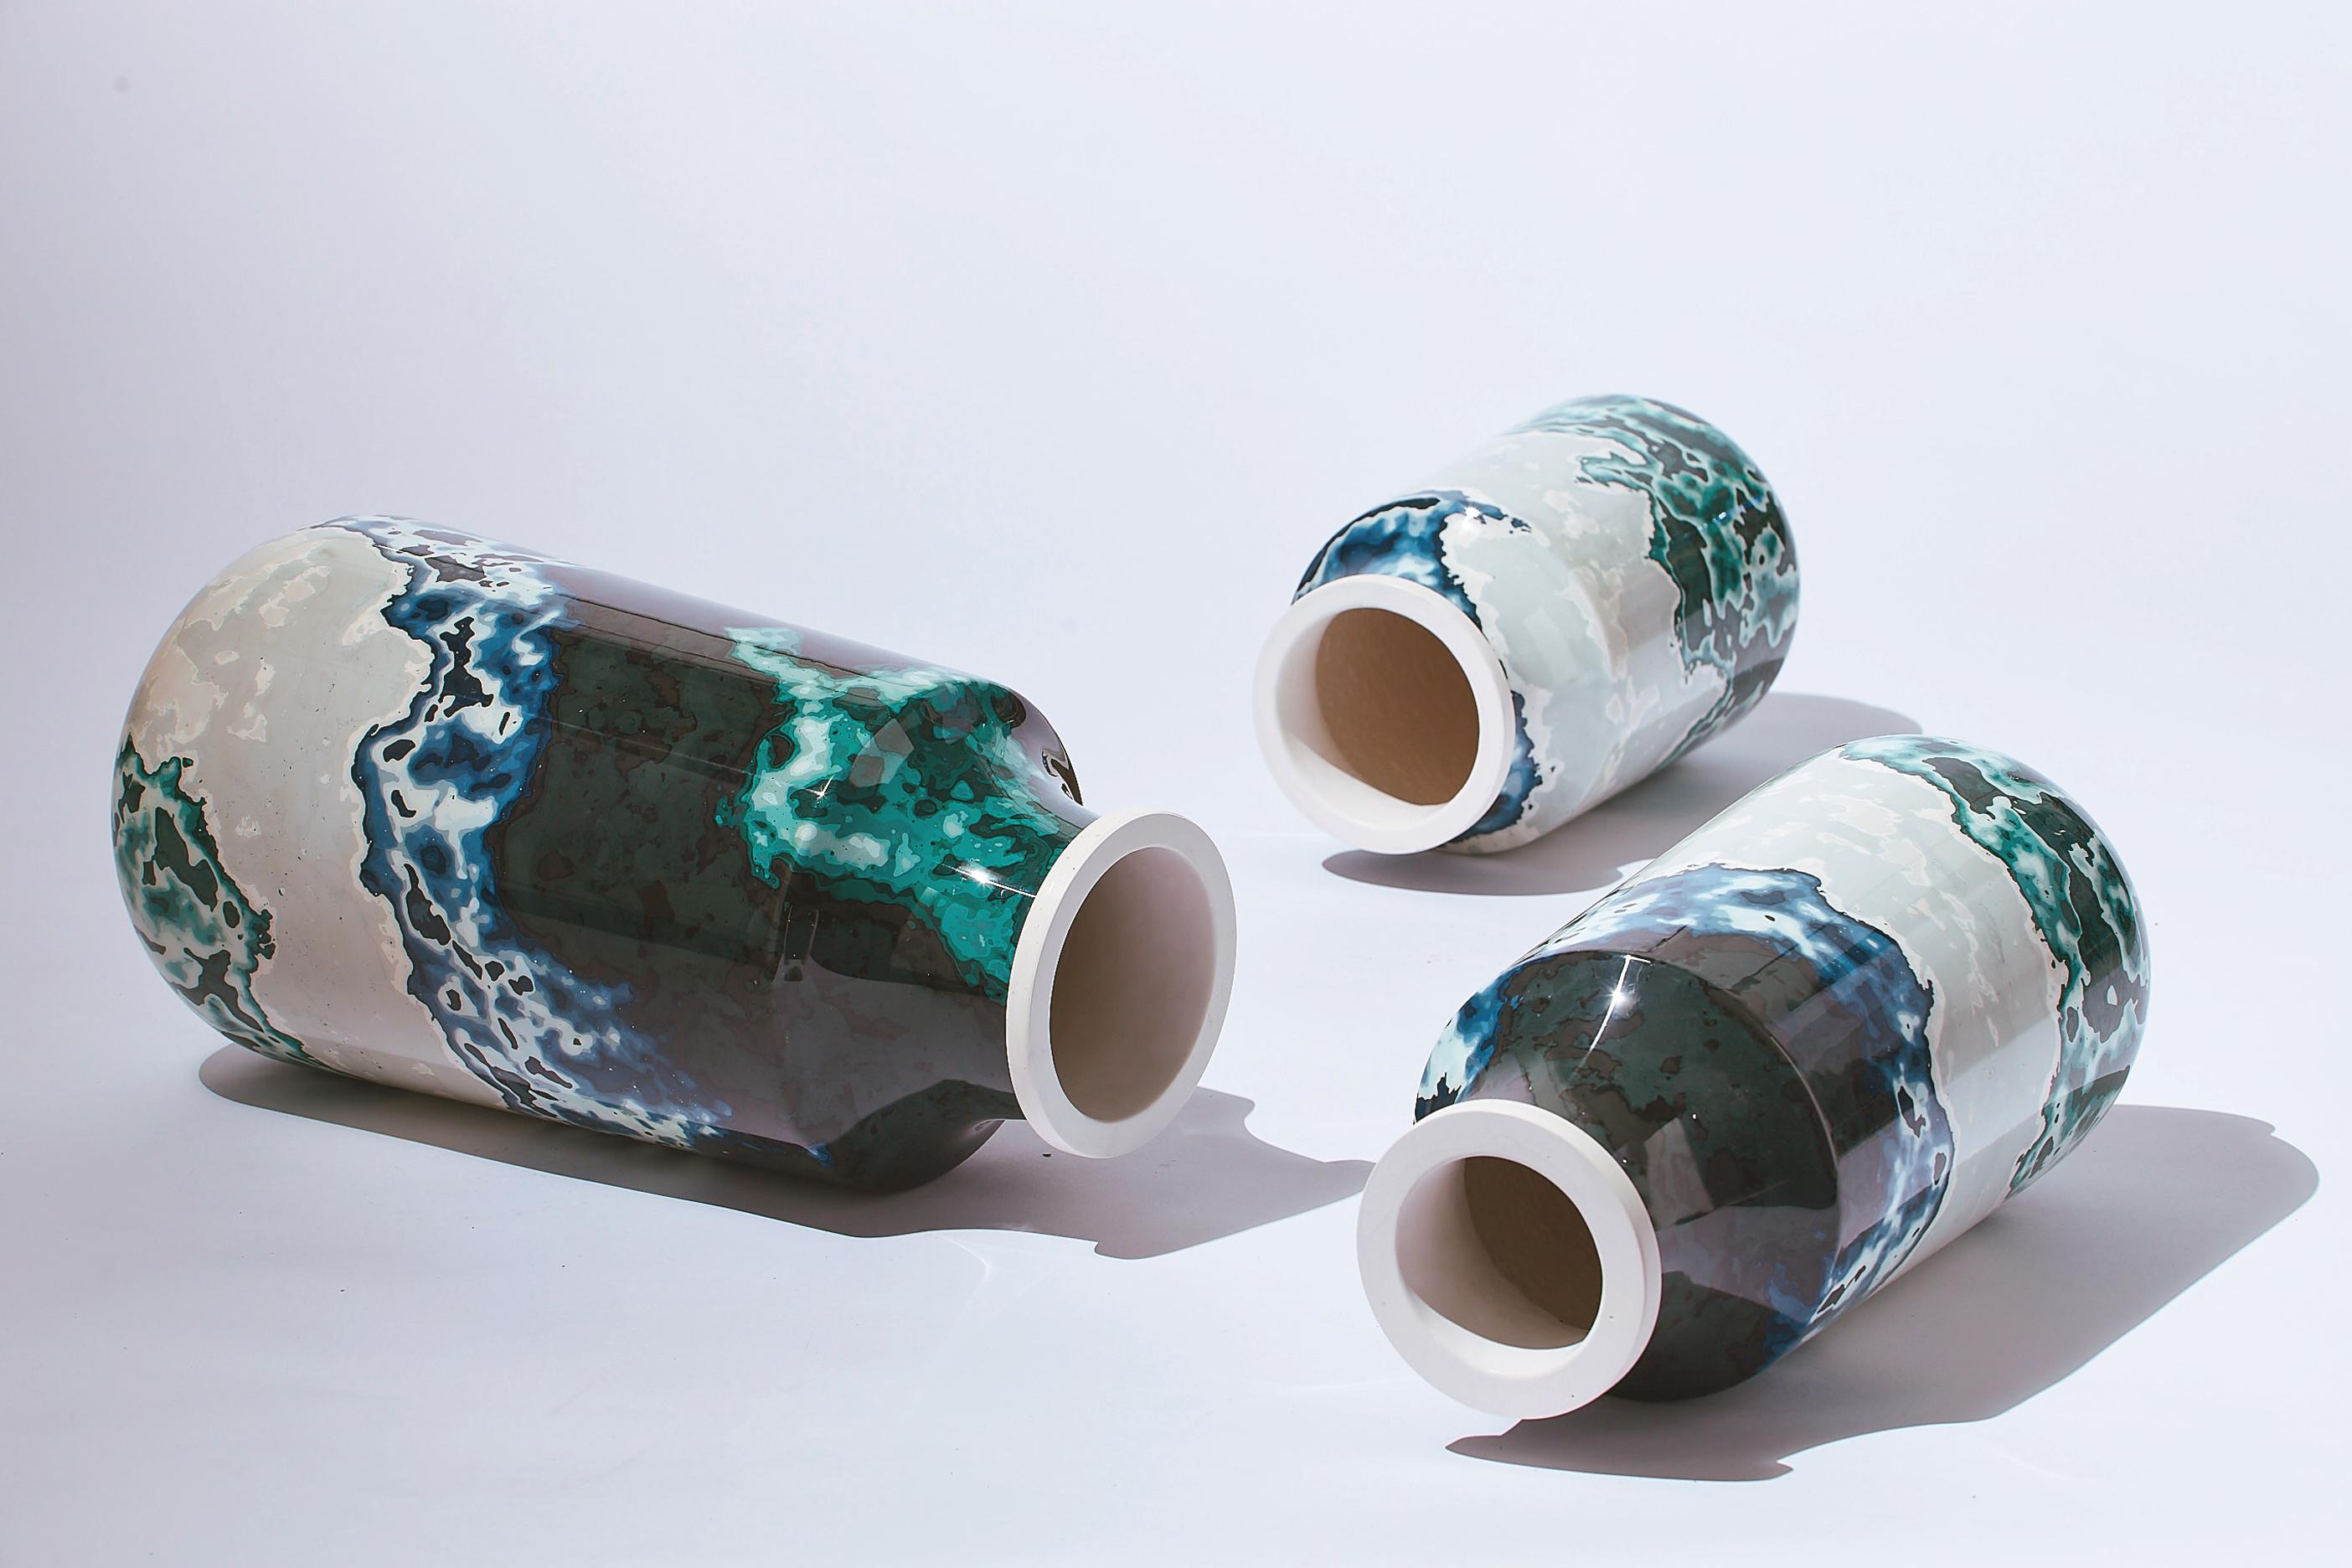 British Cloud Stone, Set of 3Contemporary Vases / Vessels in Blue & Green by Nic Parnell For Sale